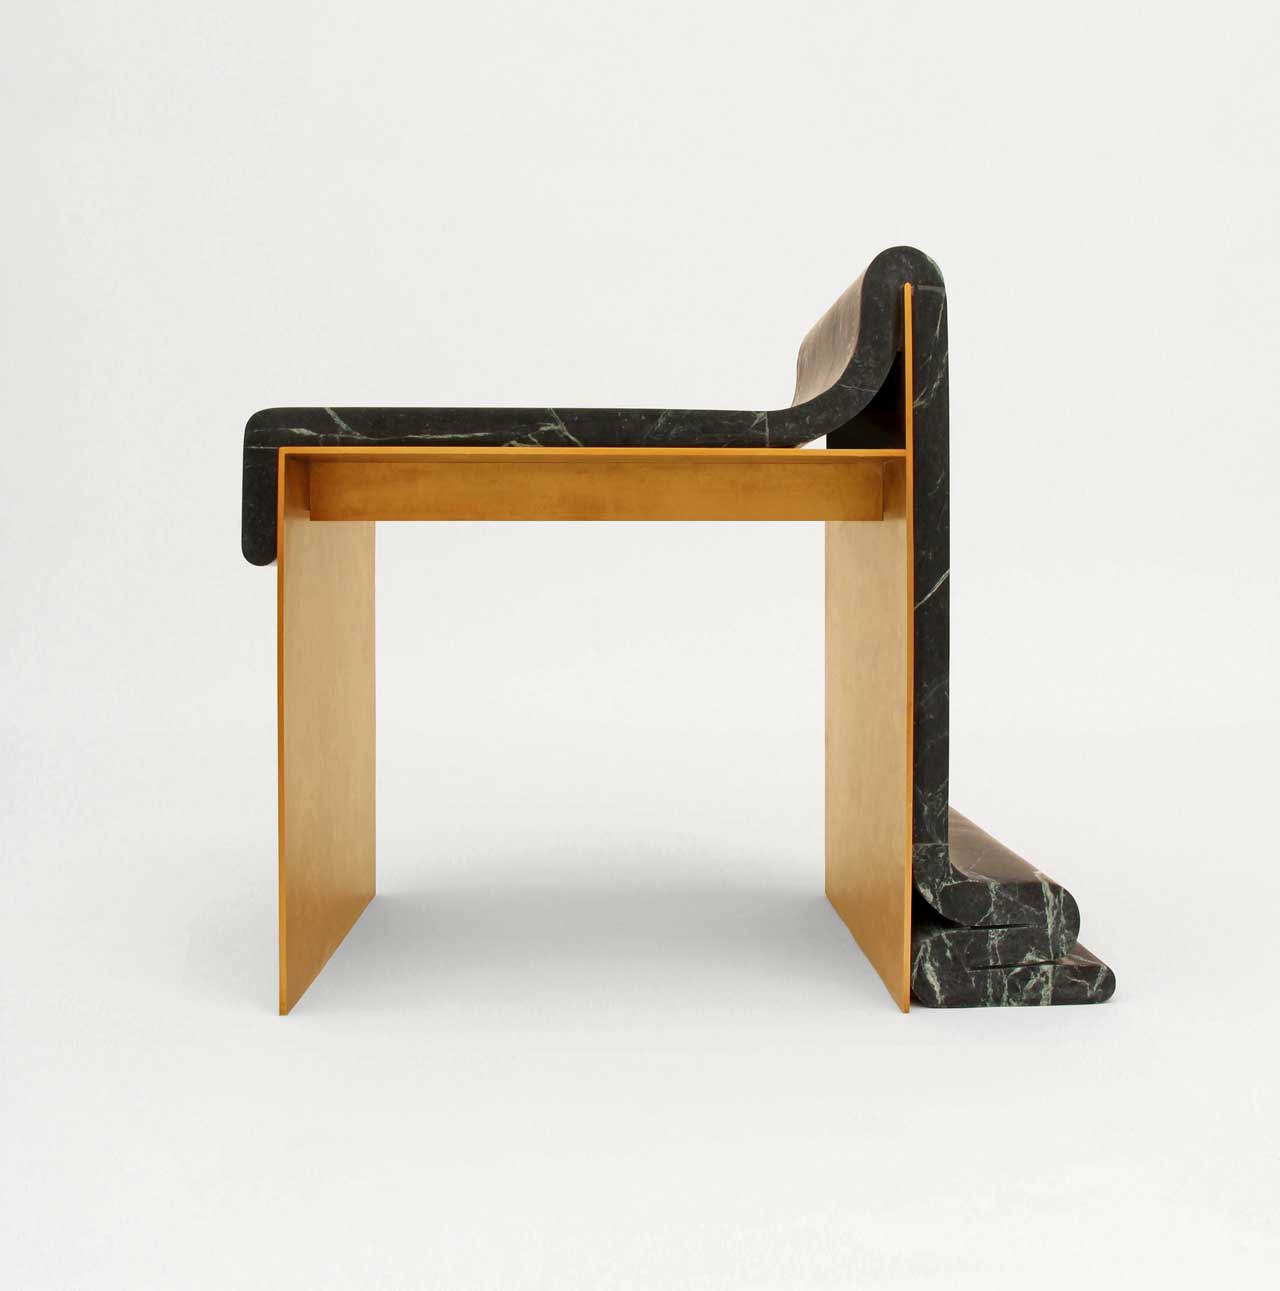 A Marble and Brass Chair That Looks as If It’s Melting